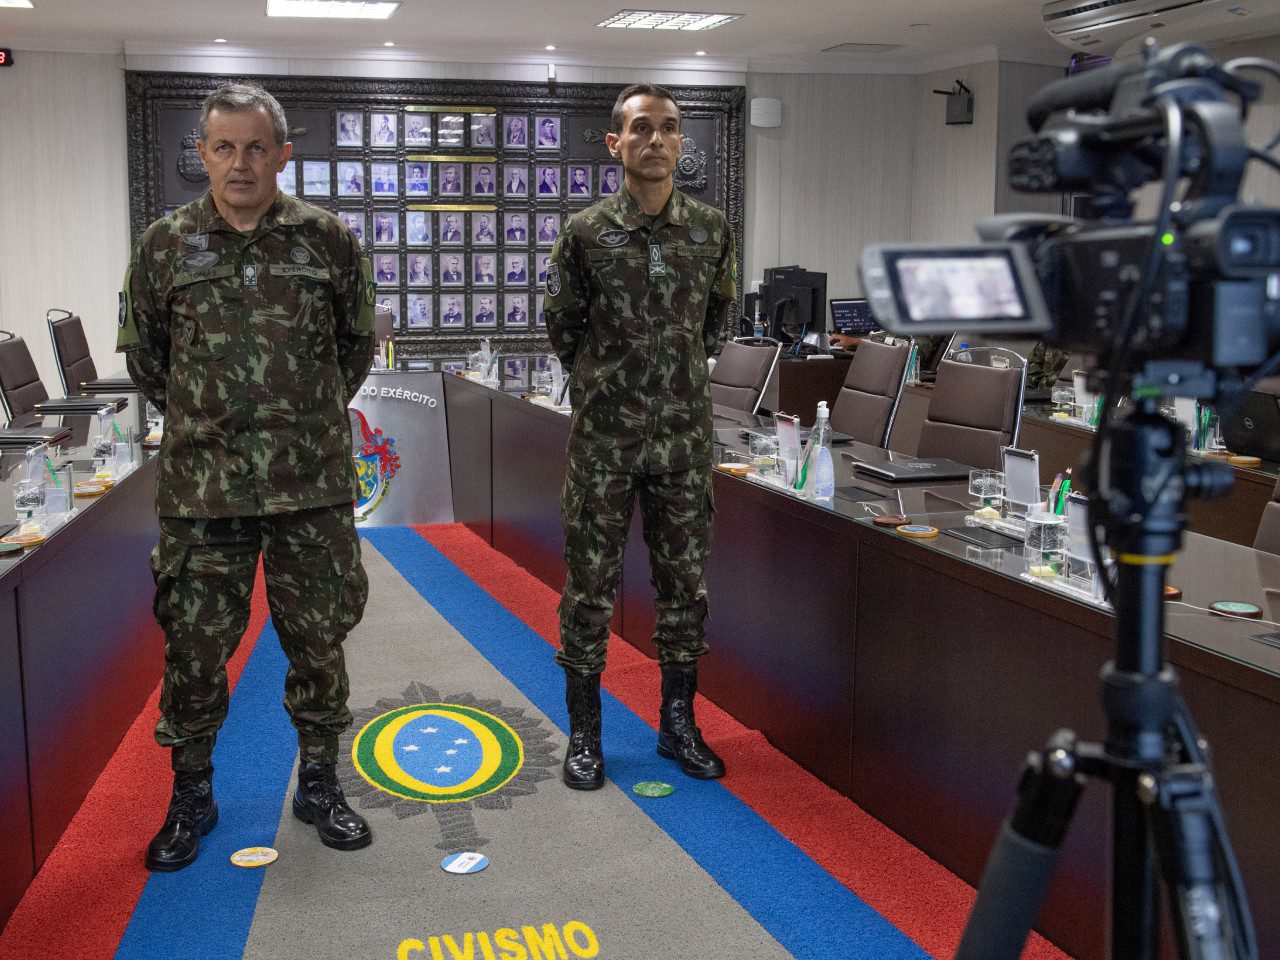 In an unprecedented manner, the Commander of the Brazilian Army addresses the entire troop by videoconference